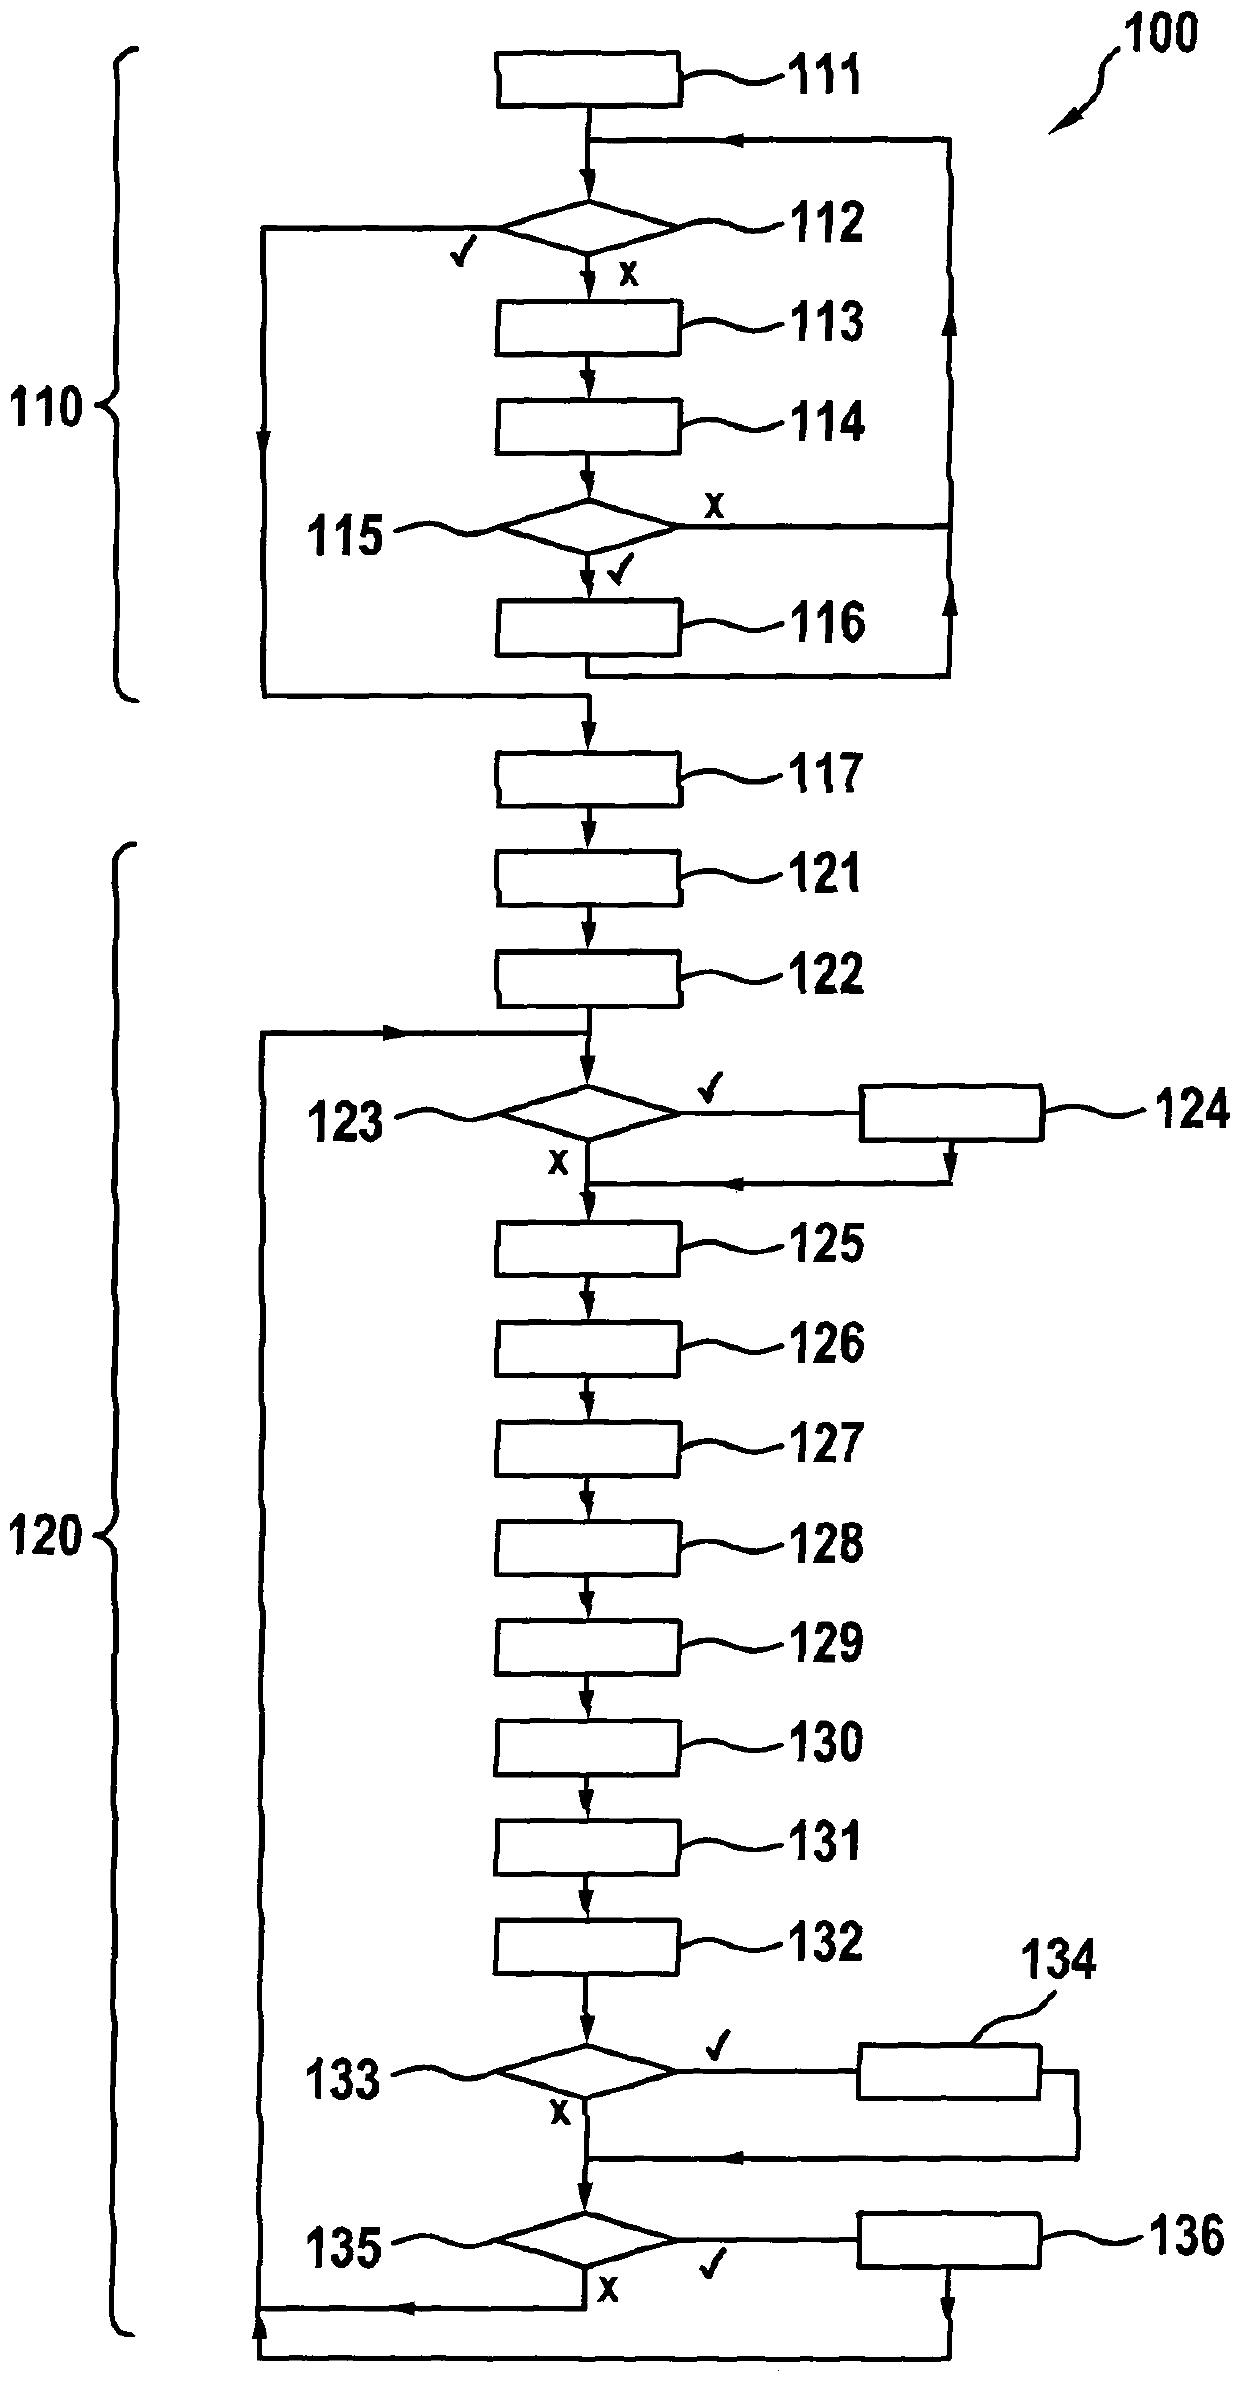 Method for learning at least one pump feature of pump of feed module of scr catalyst system